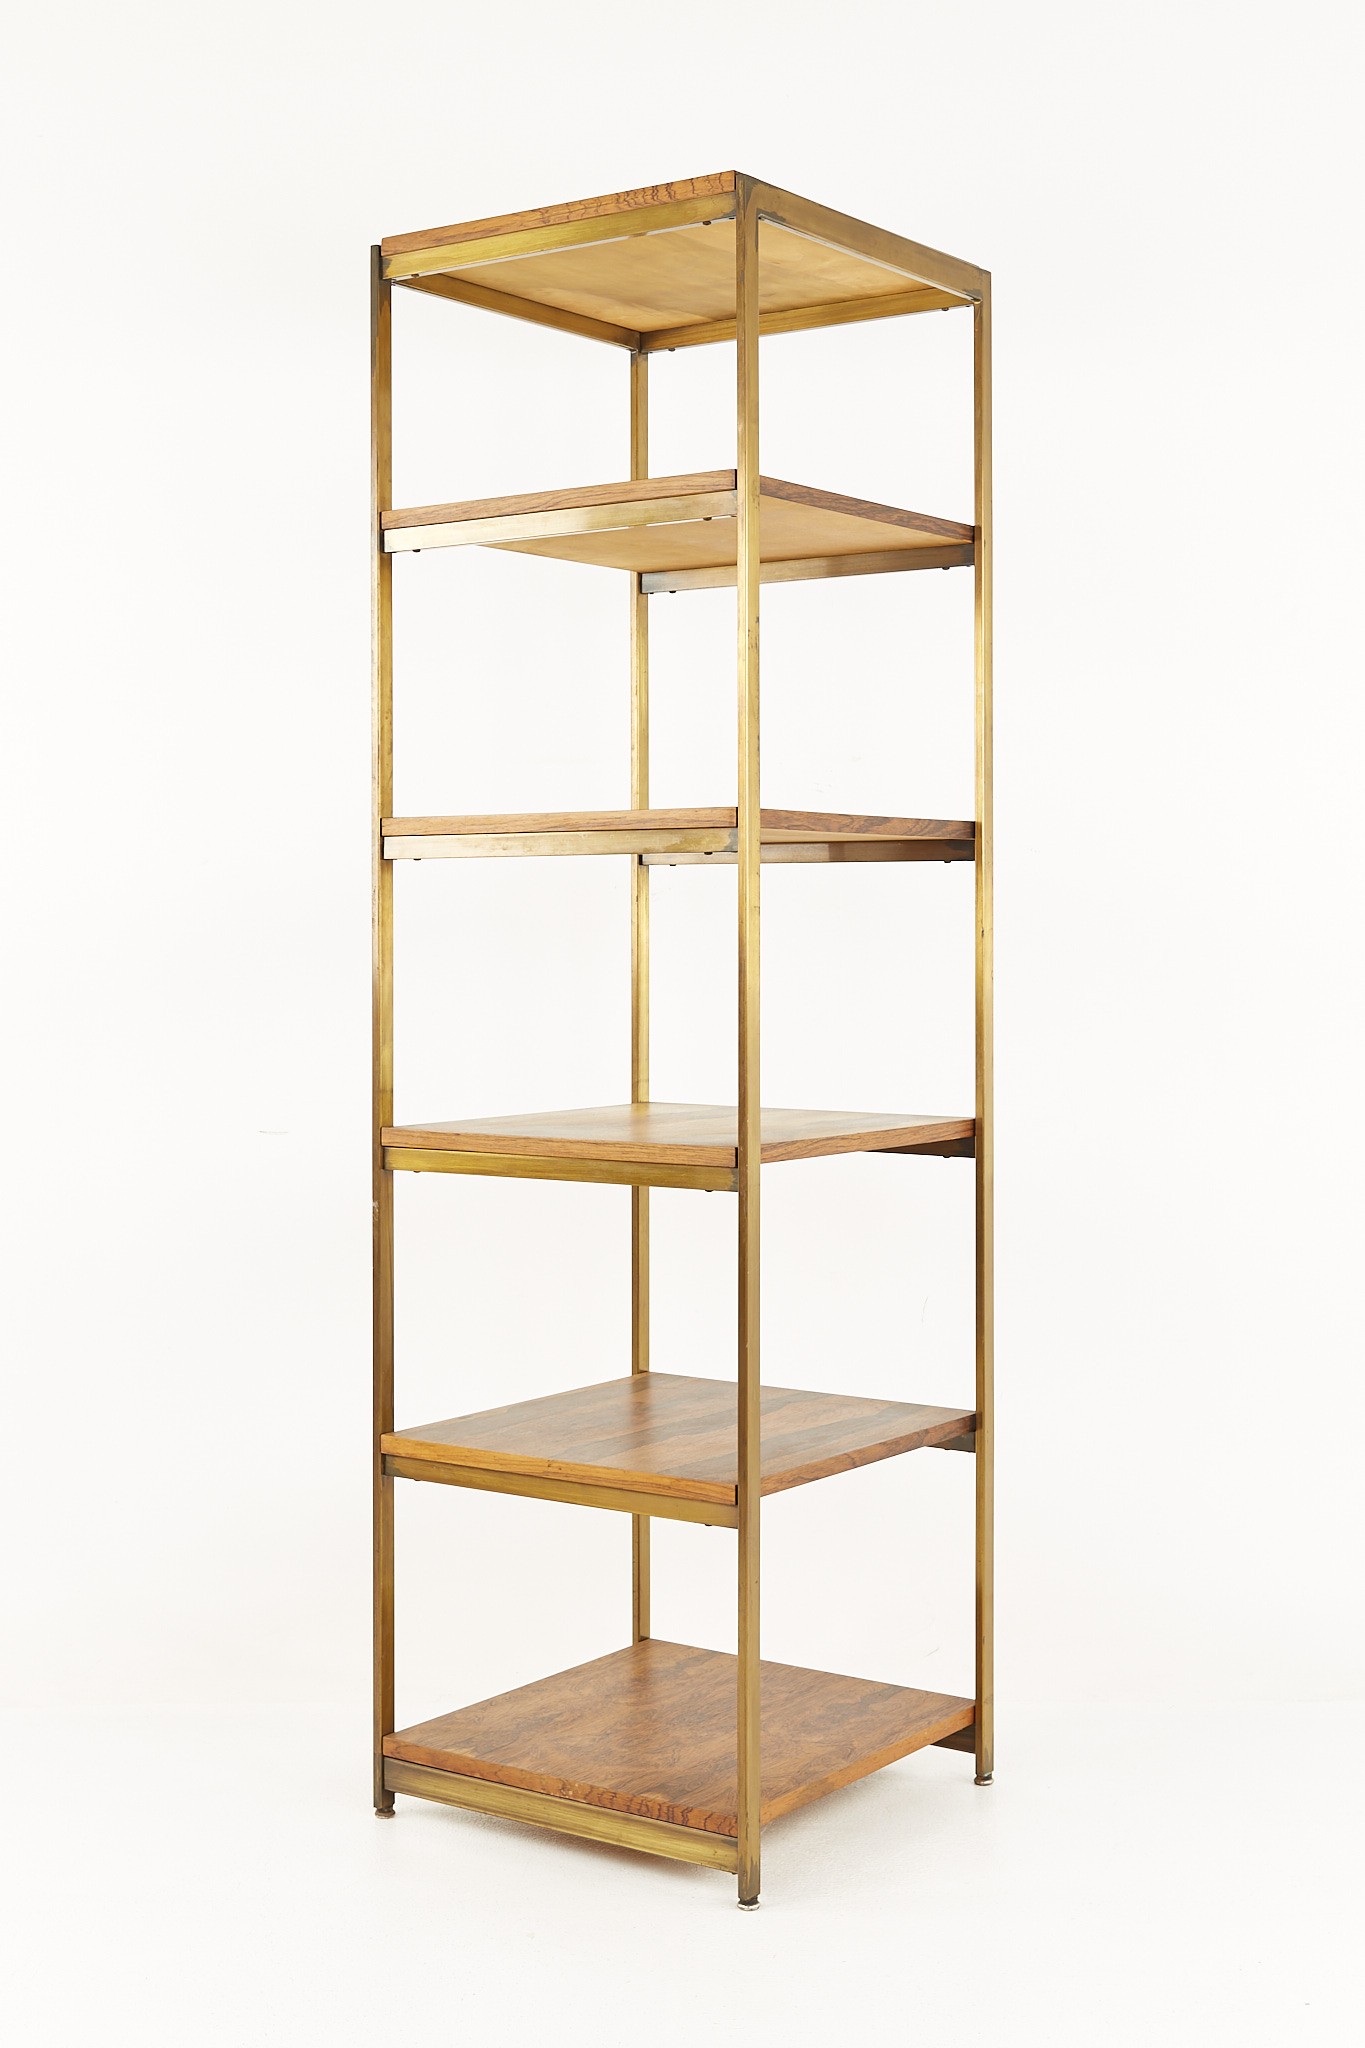 Flair Inc Mid Century Rosewood and Brass Etagere